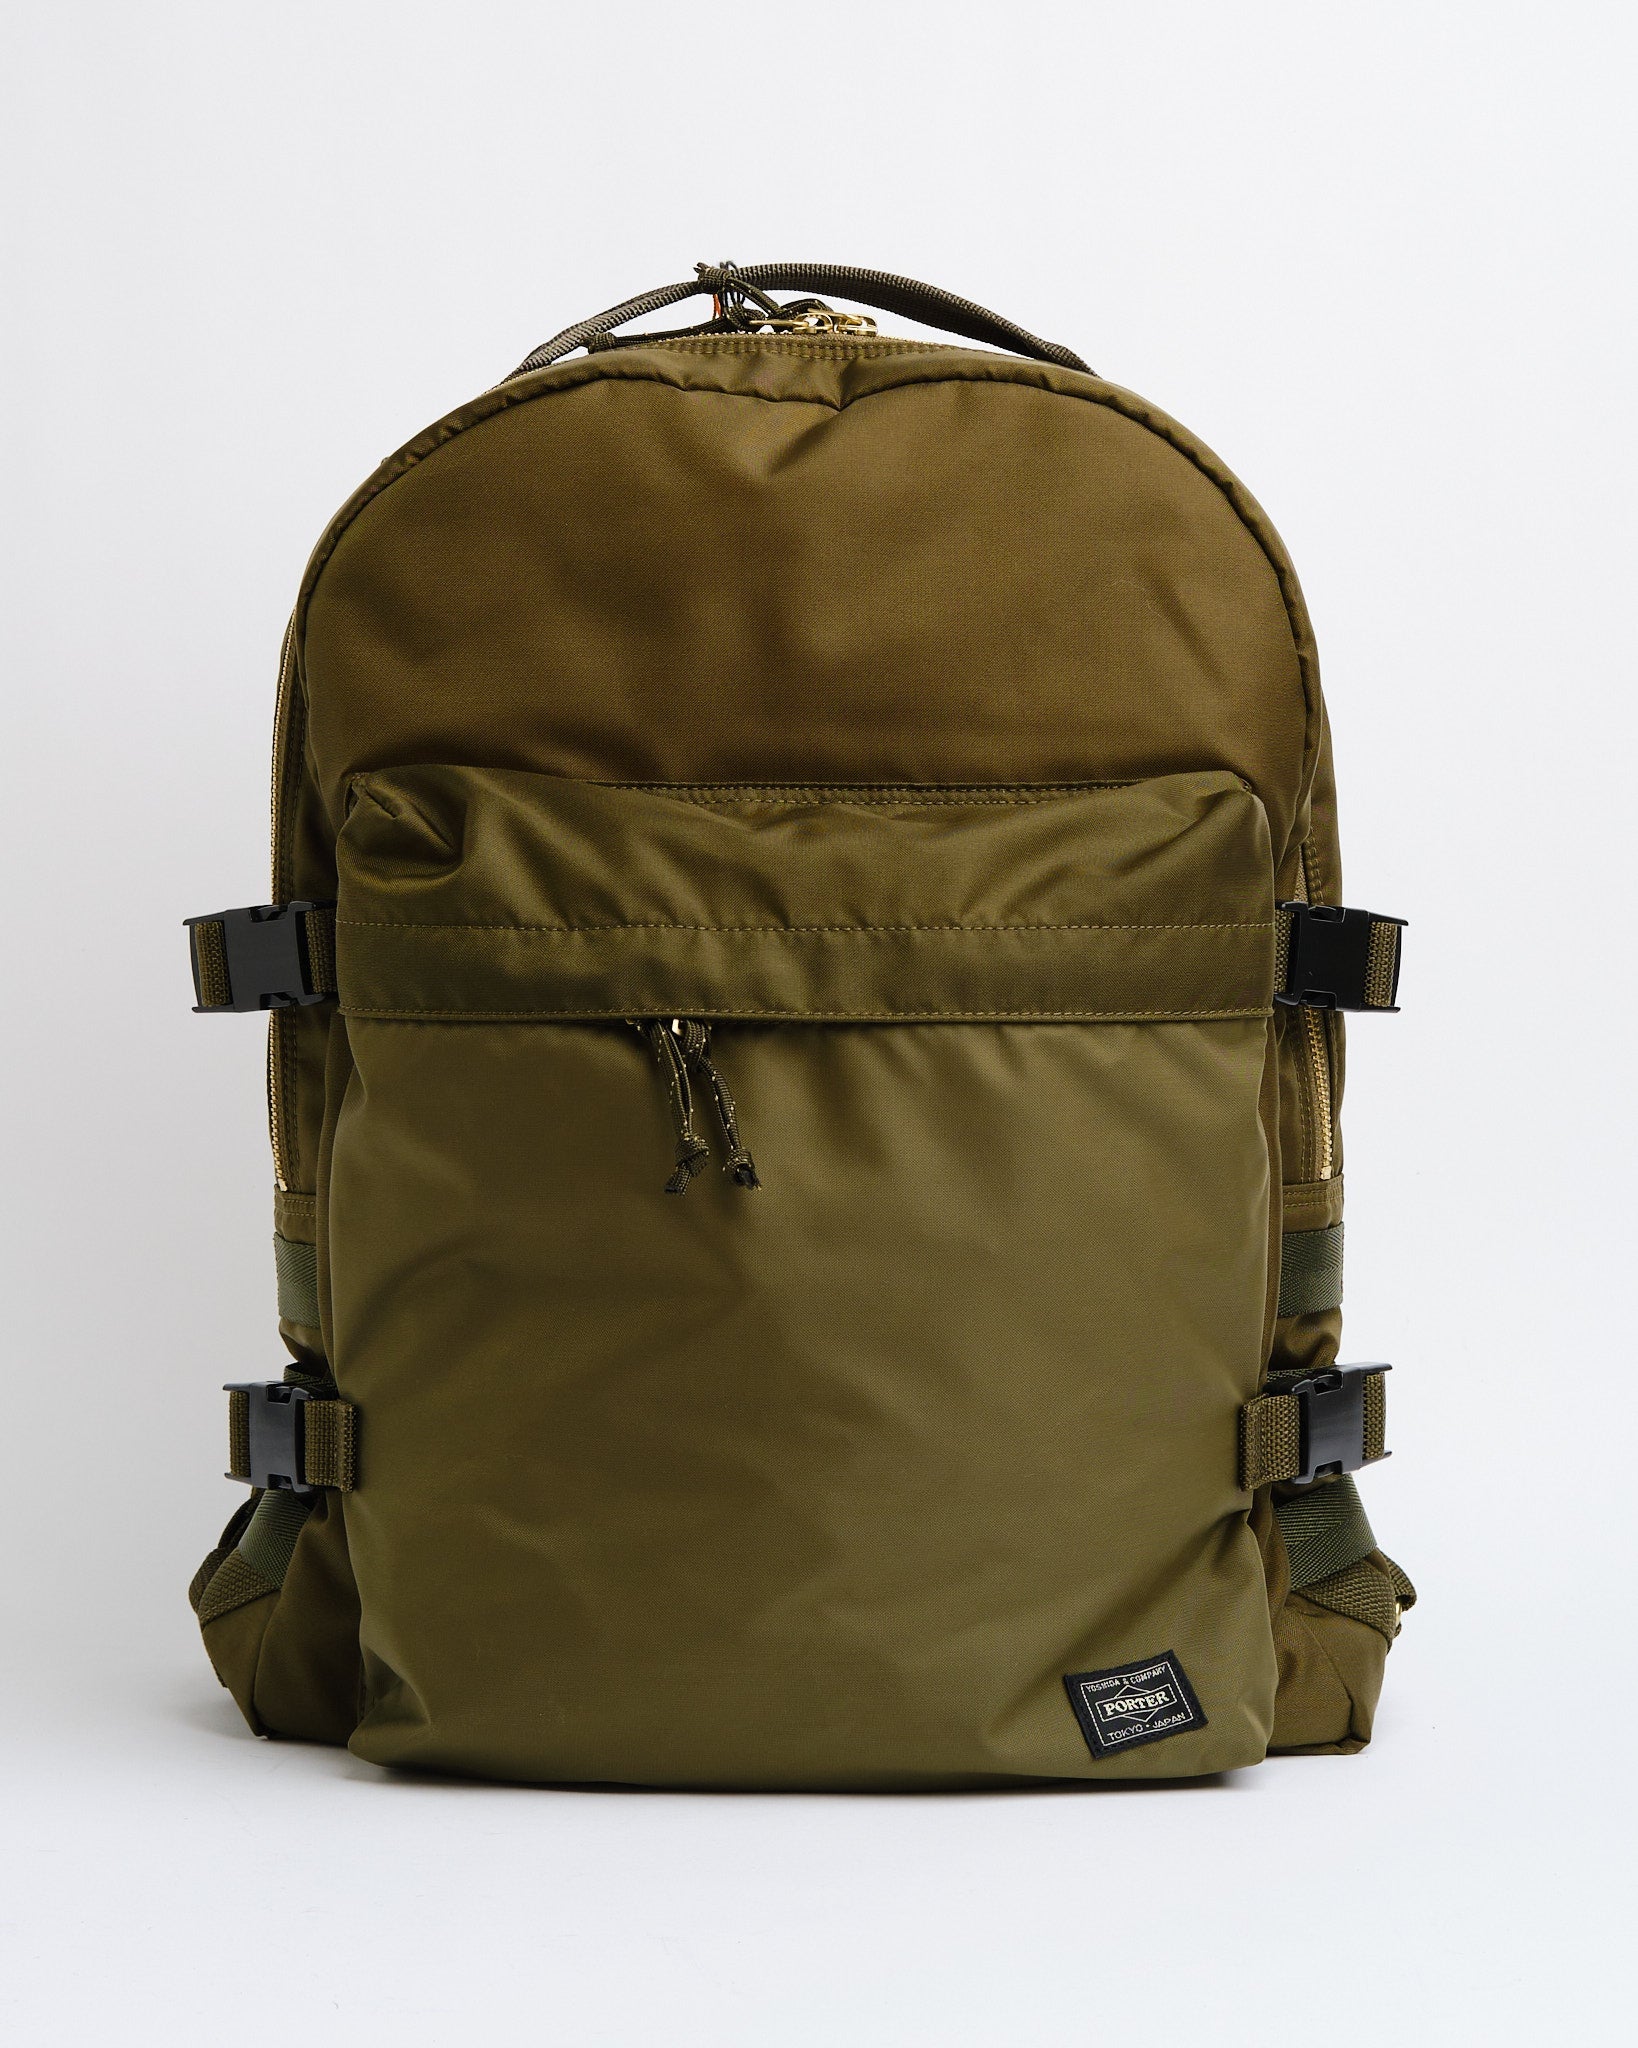 Force Daypack Olive Drab - Meadow